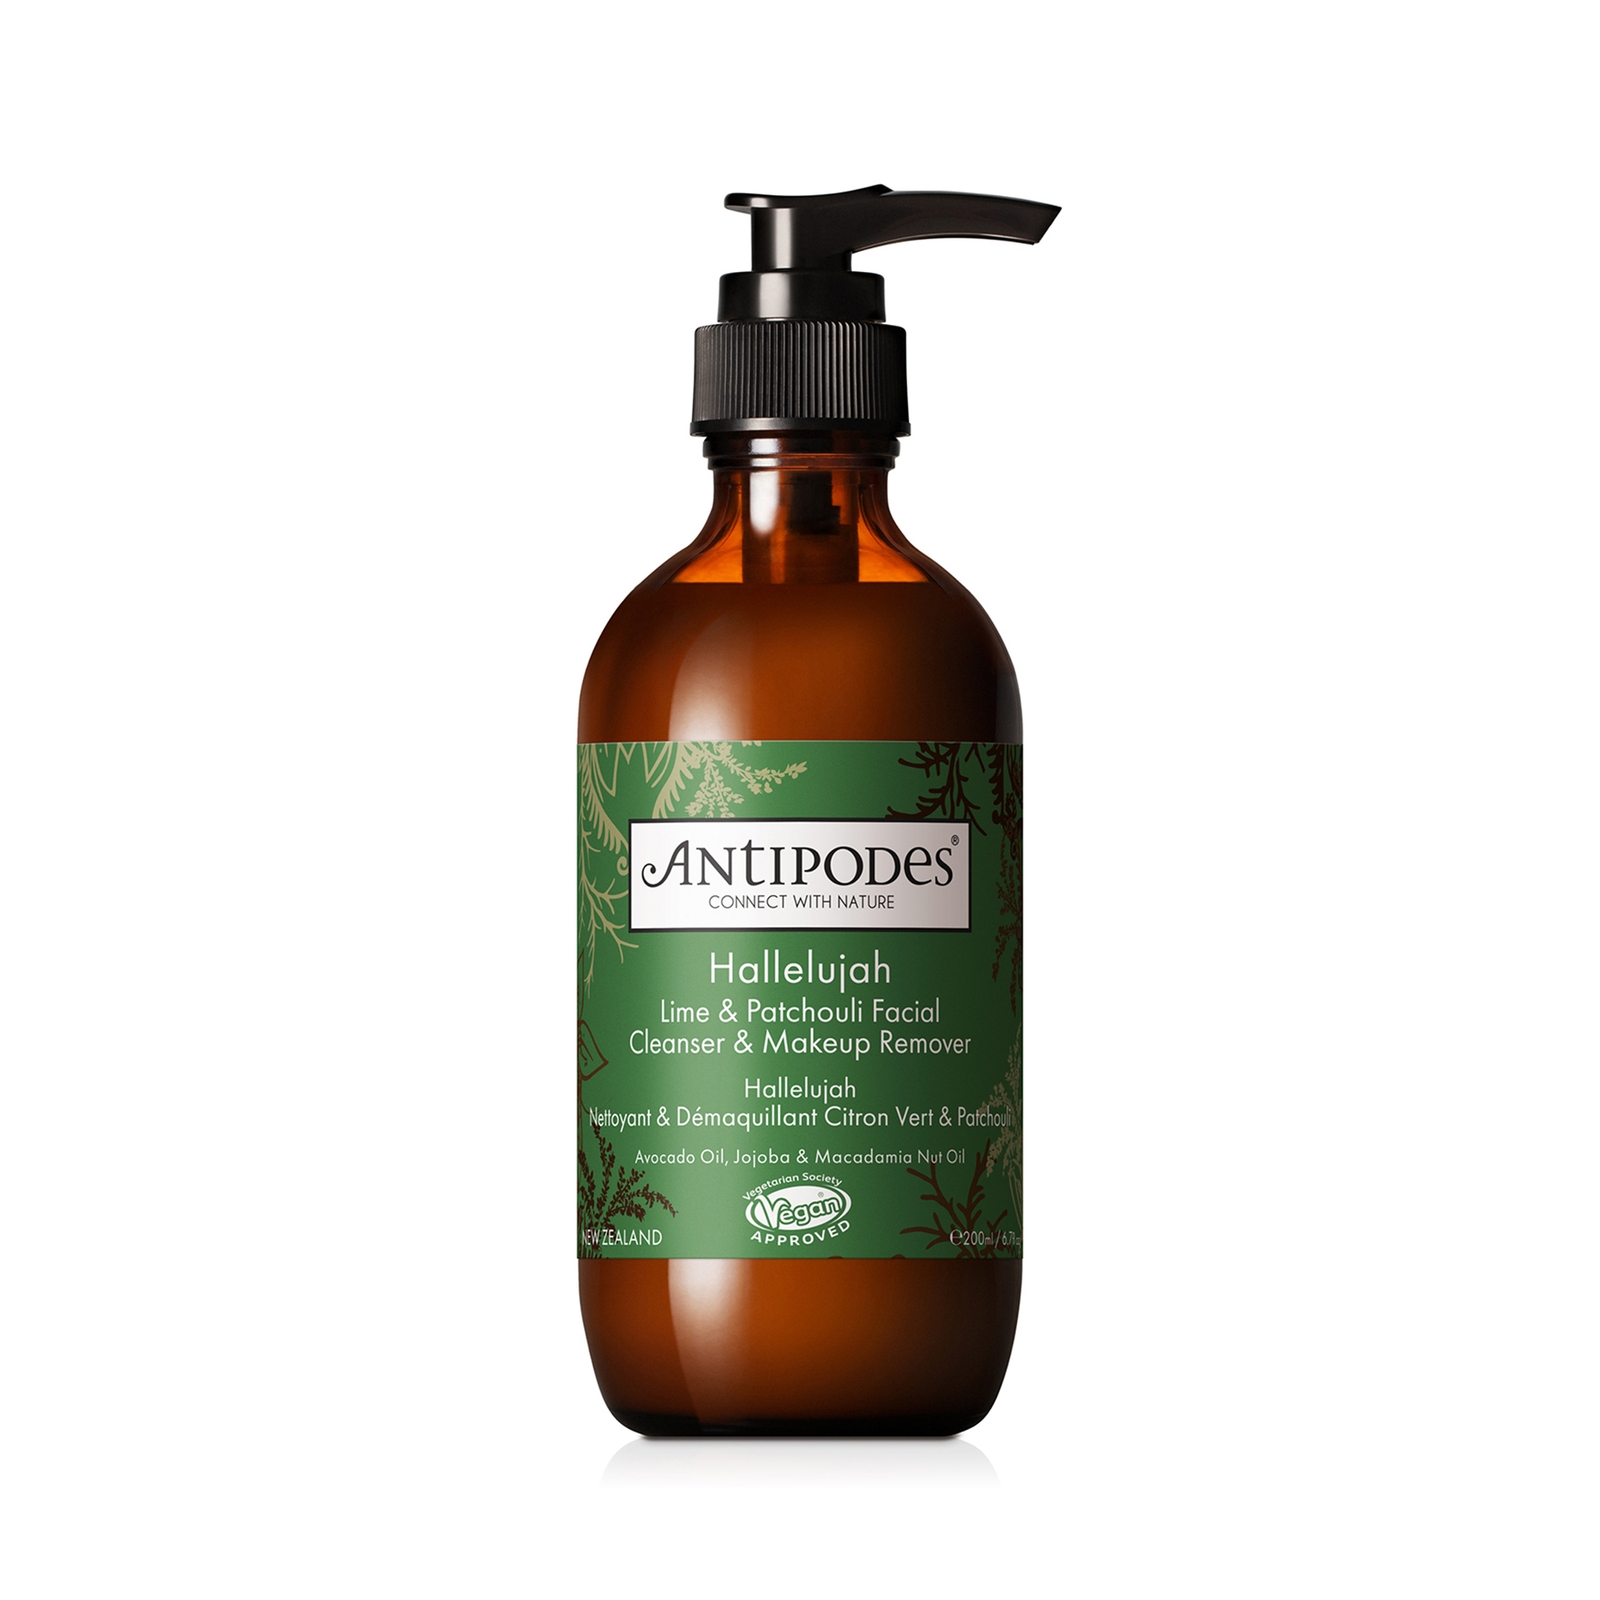 Photos - Facial / Body Cleansing Product Antipodes Hallelujah Lime and Patchouli Cleanser and Makeup Remover 200ml